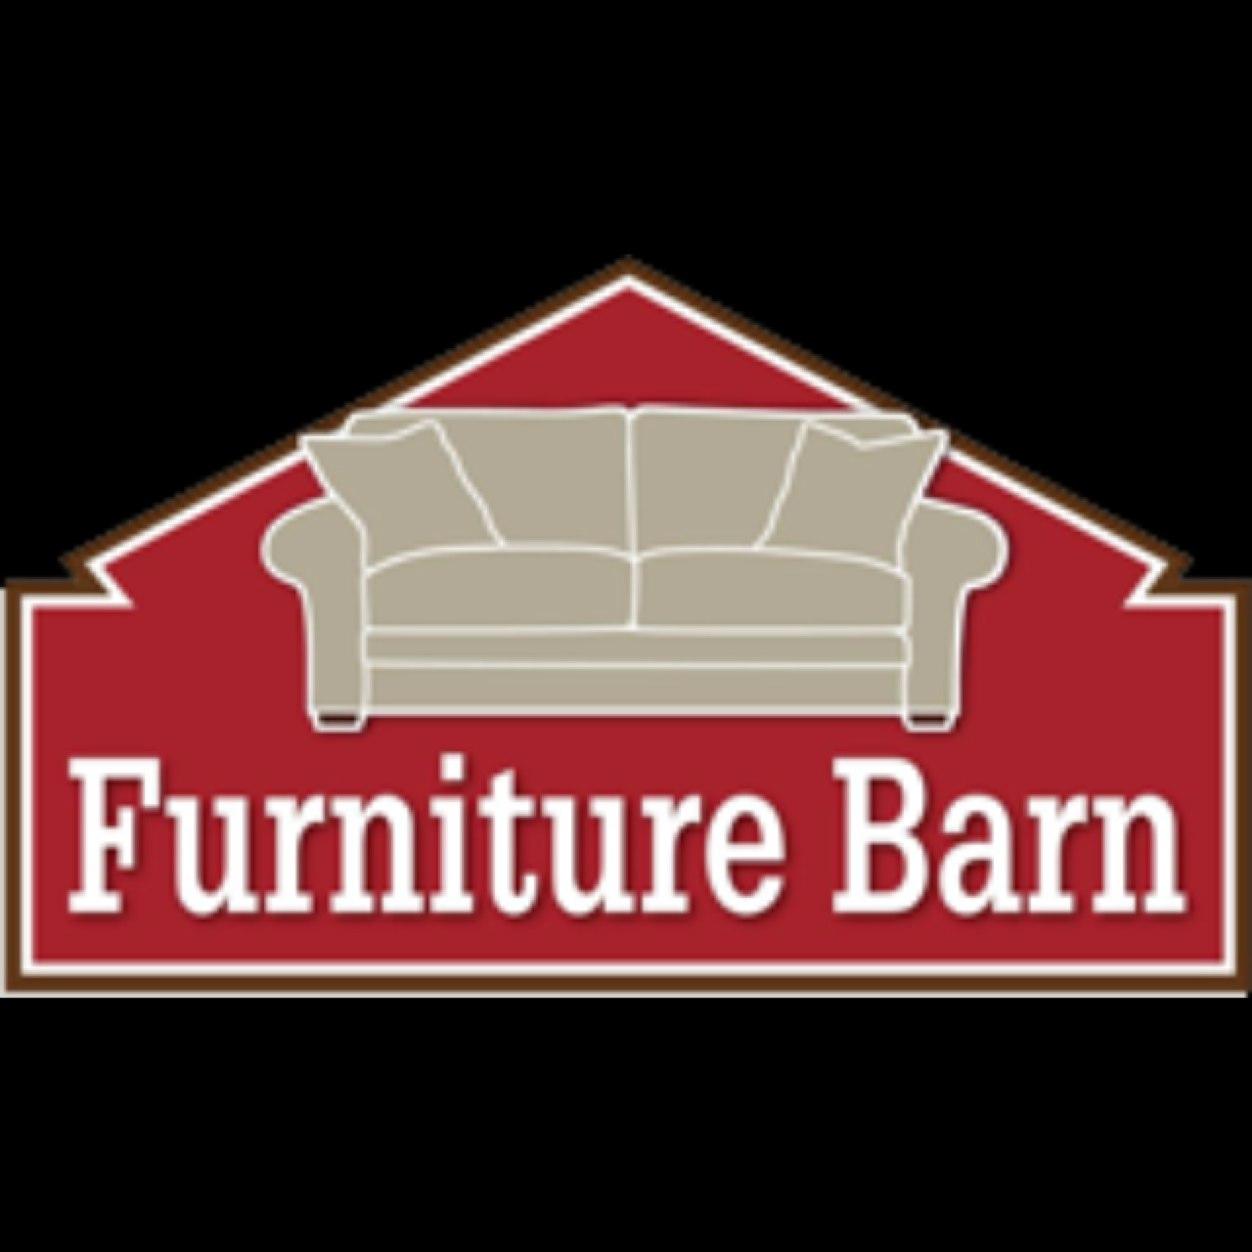 Family owned and operated for over 40 years. 20,000 square feet of furniture for your shopping needs. A+ BBB rating.